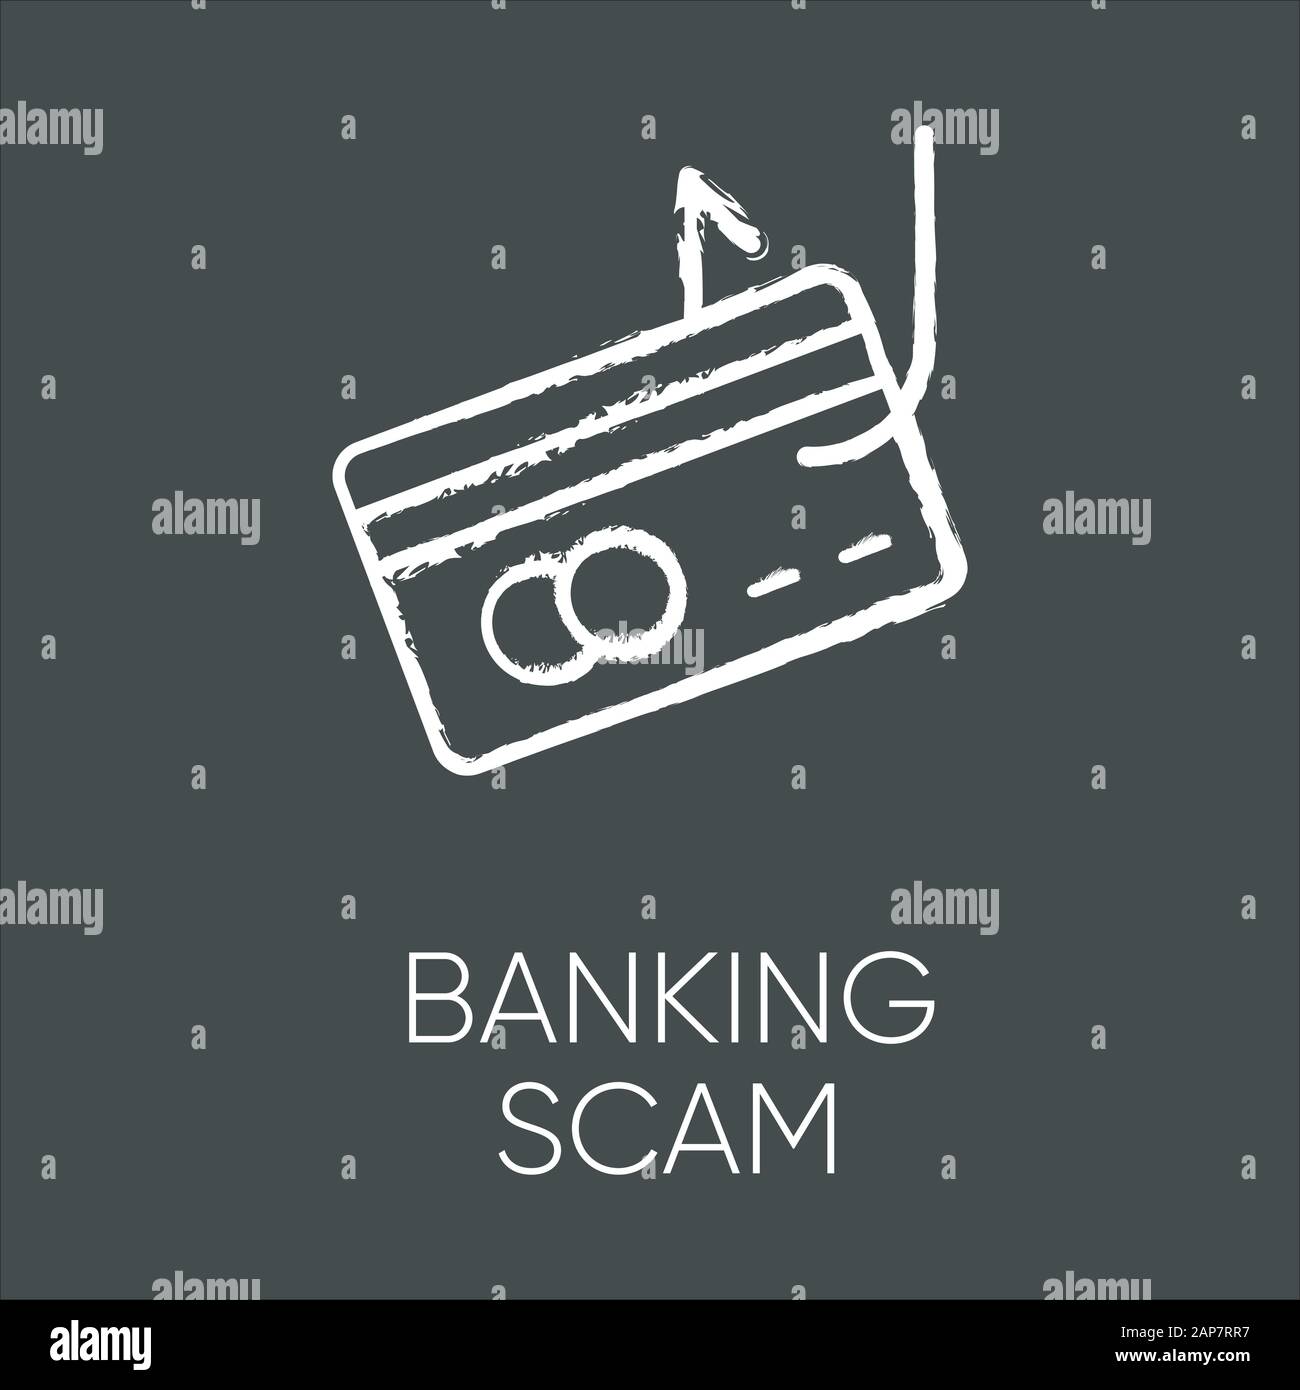 Banking scam chalk icon. Skimming. Identity theft. Credit card phishing. Financial fraud. Fake loan offer. Illegal money gain. Malicious, fraudulent s Stock Vector